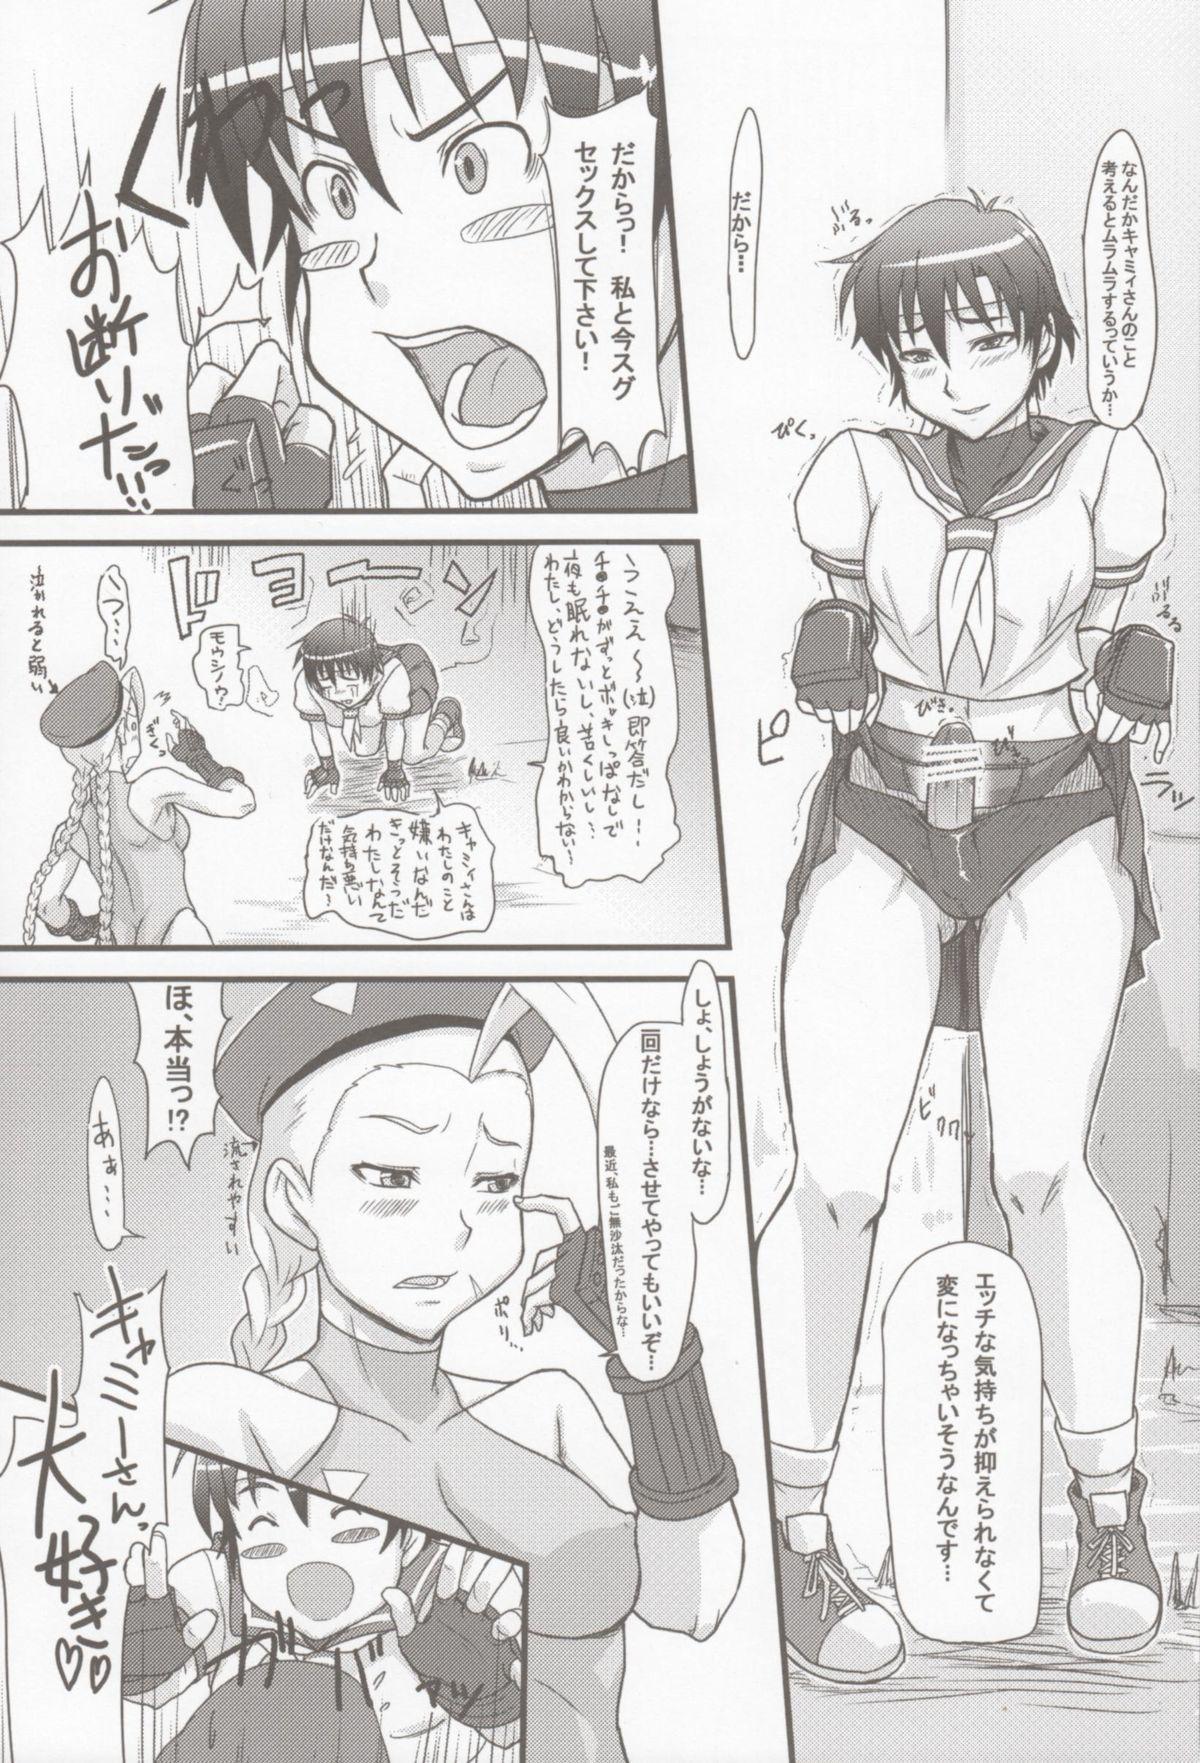 Culito Cammy Saku! Fighter Material Vol. 2 - Street fighter Hot Naked Girl - Page 8